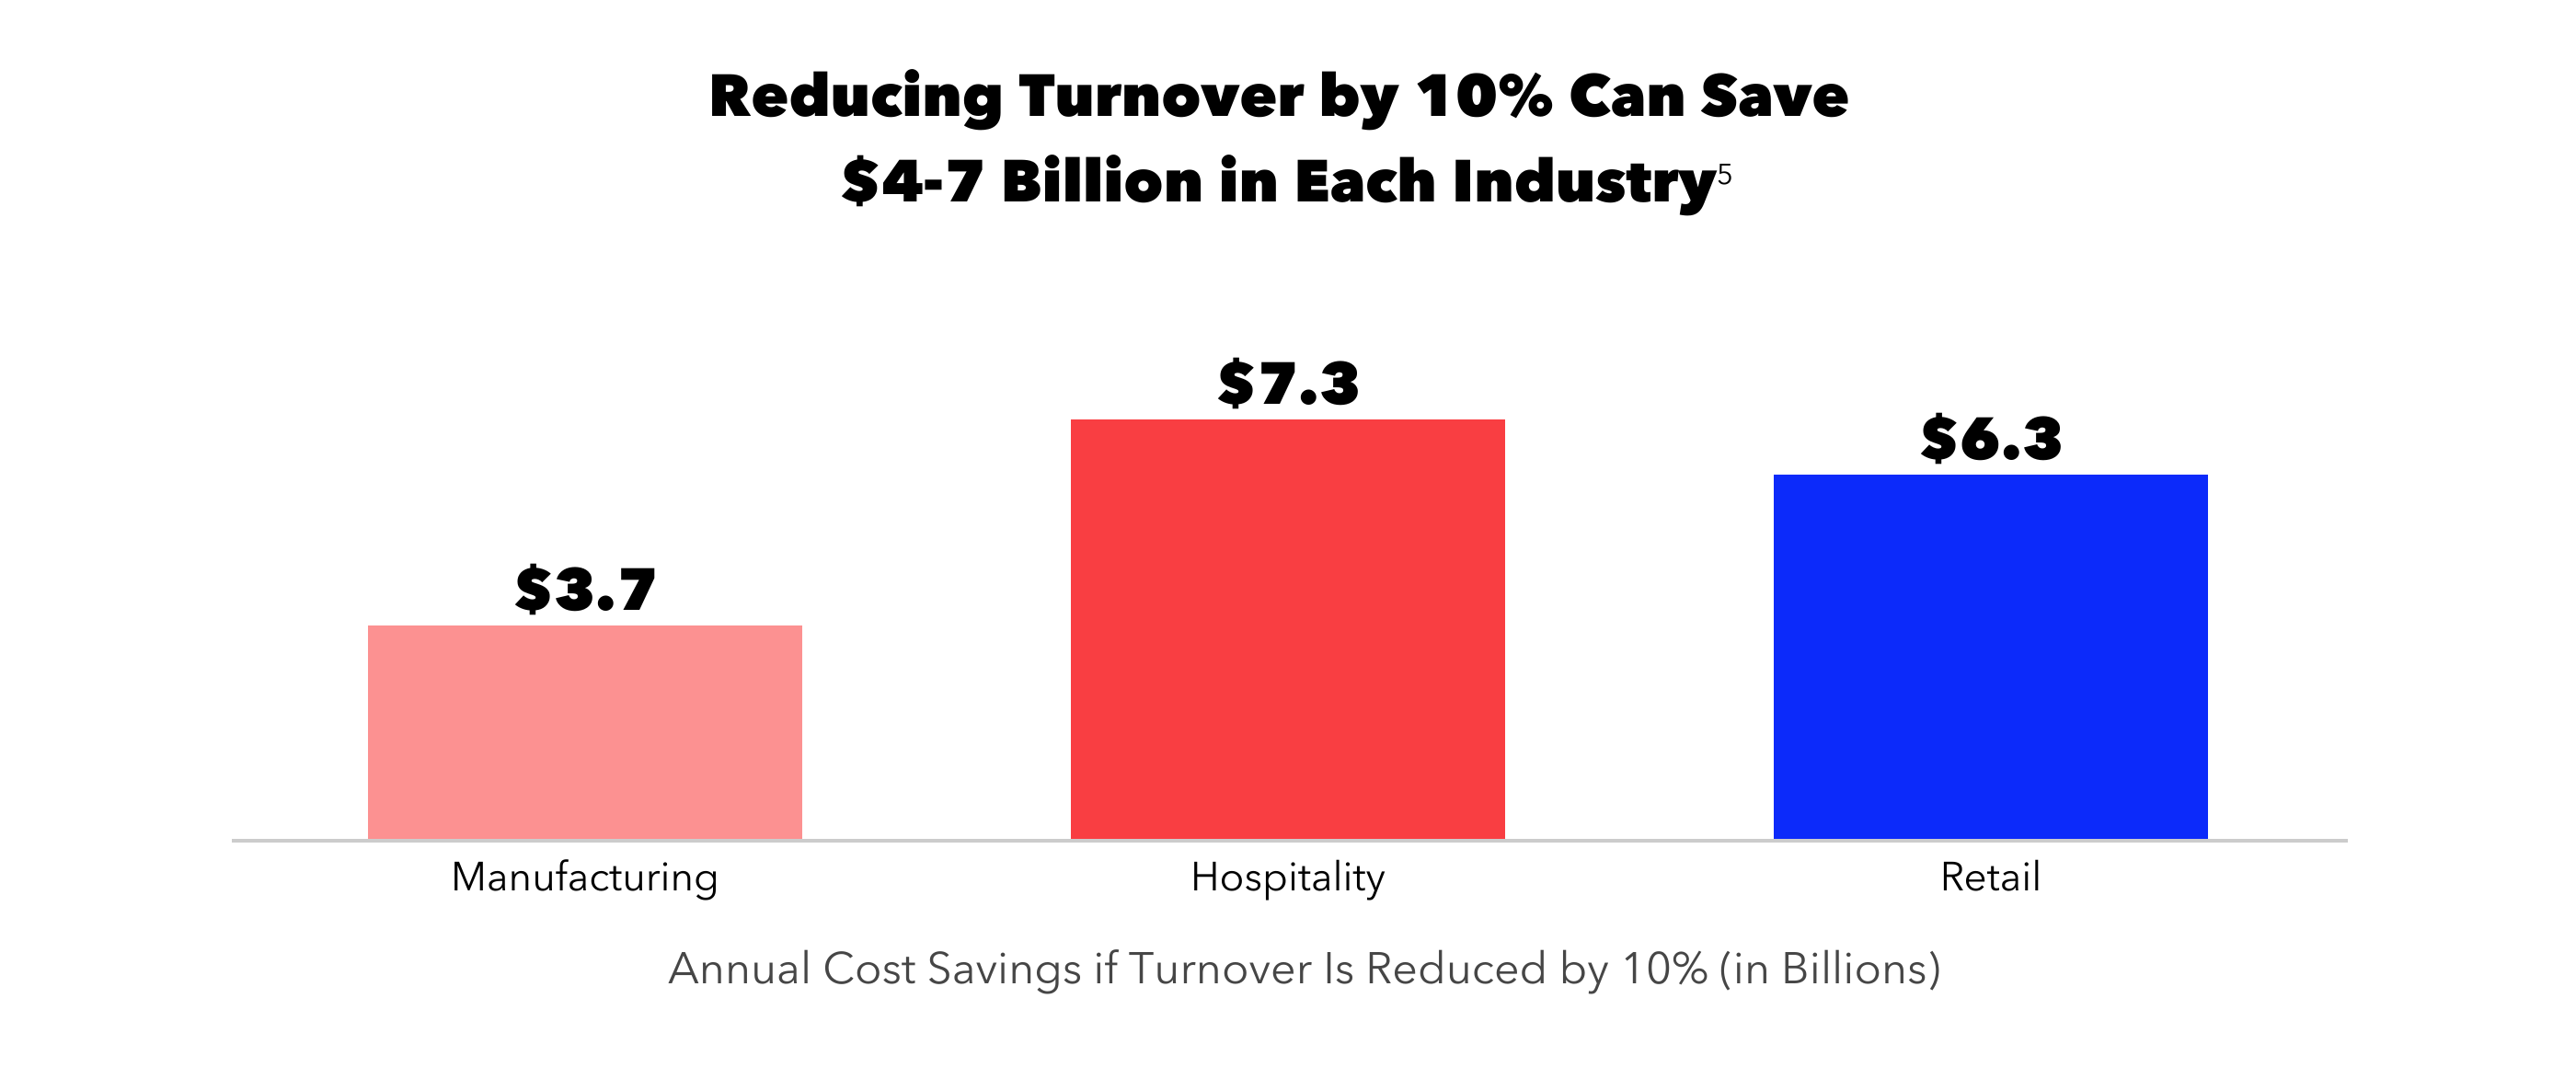 Reducing turnover by 10% can save $4-7 Billion in manufacturing, hospitality, and retail.